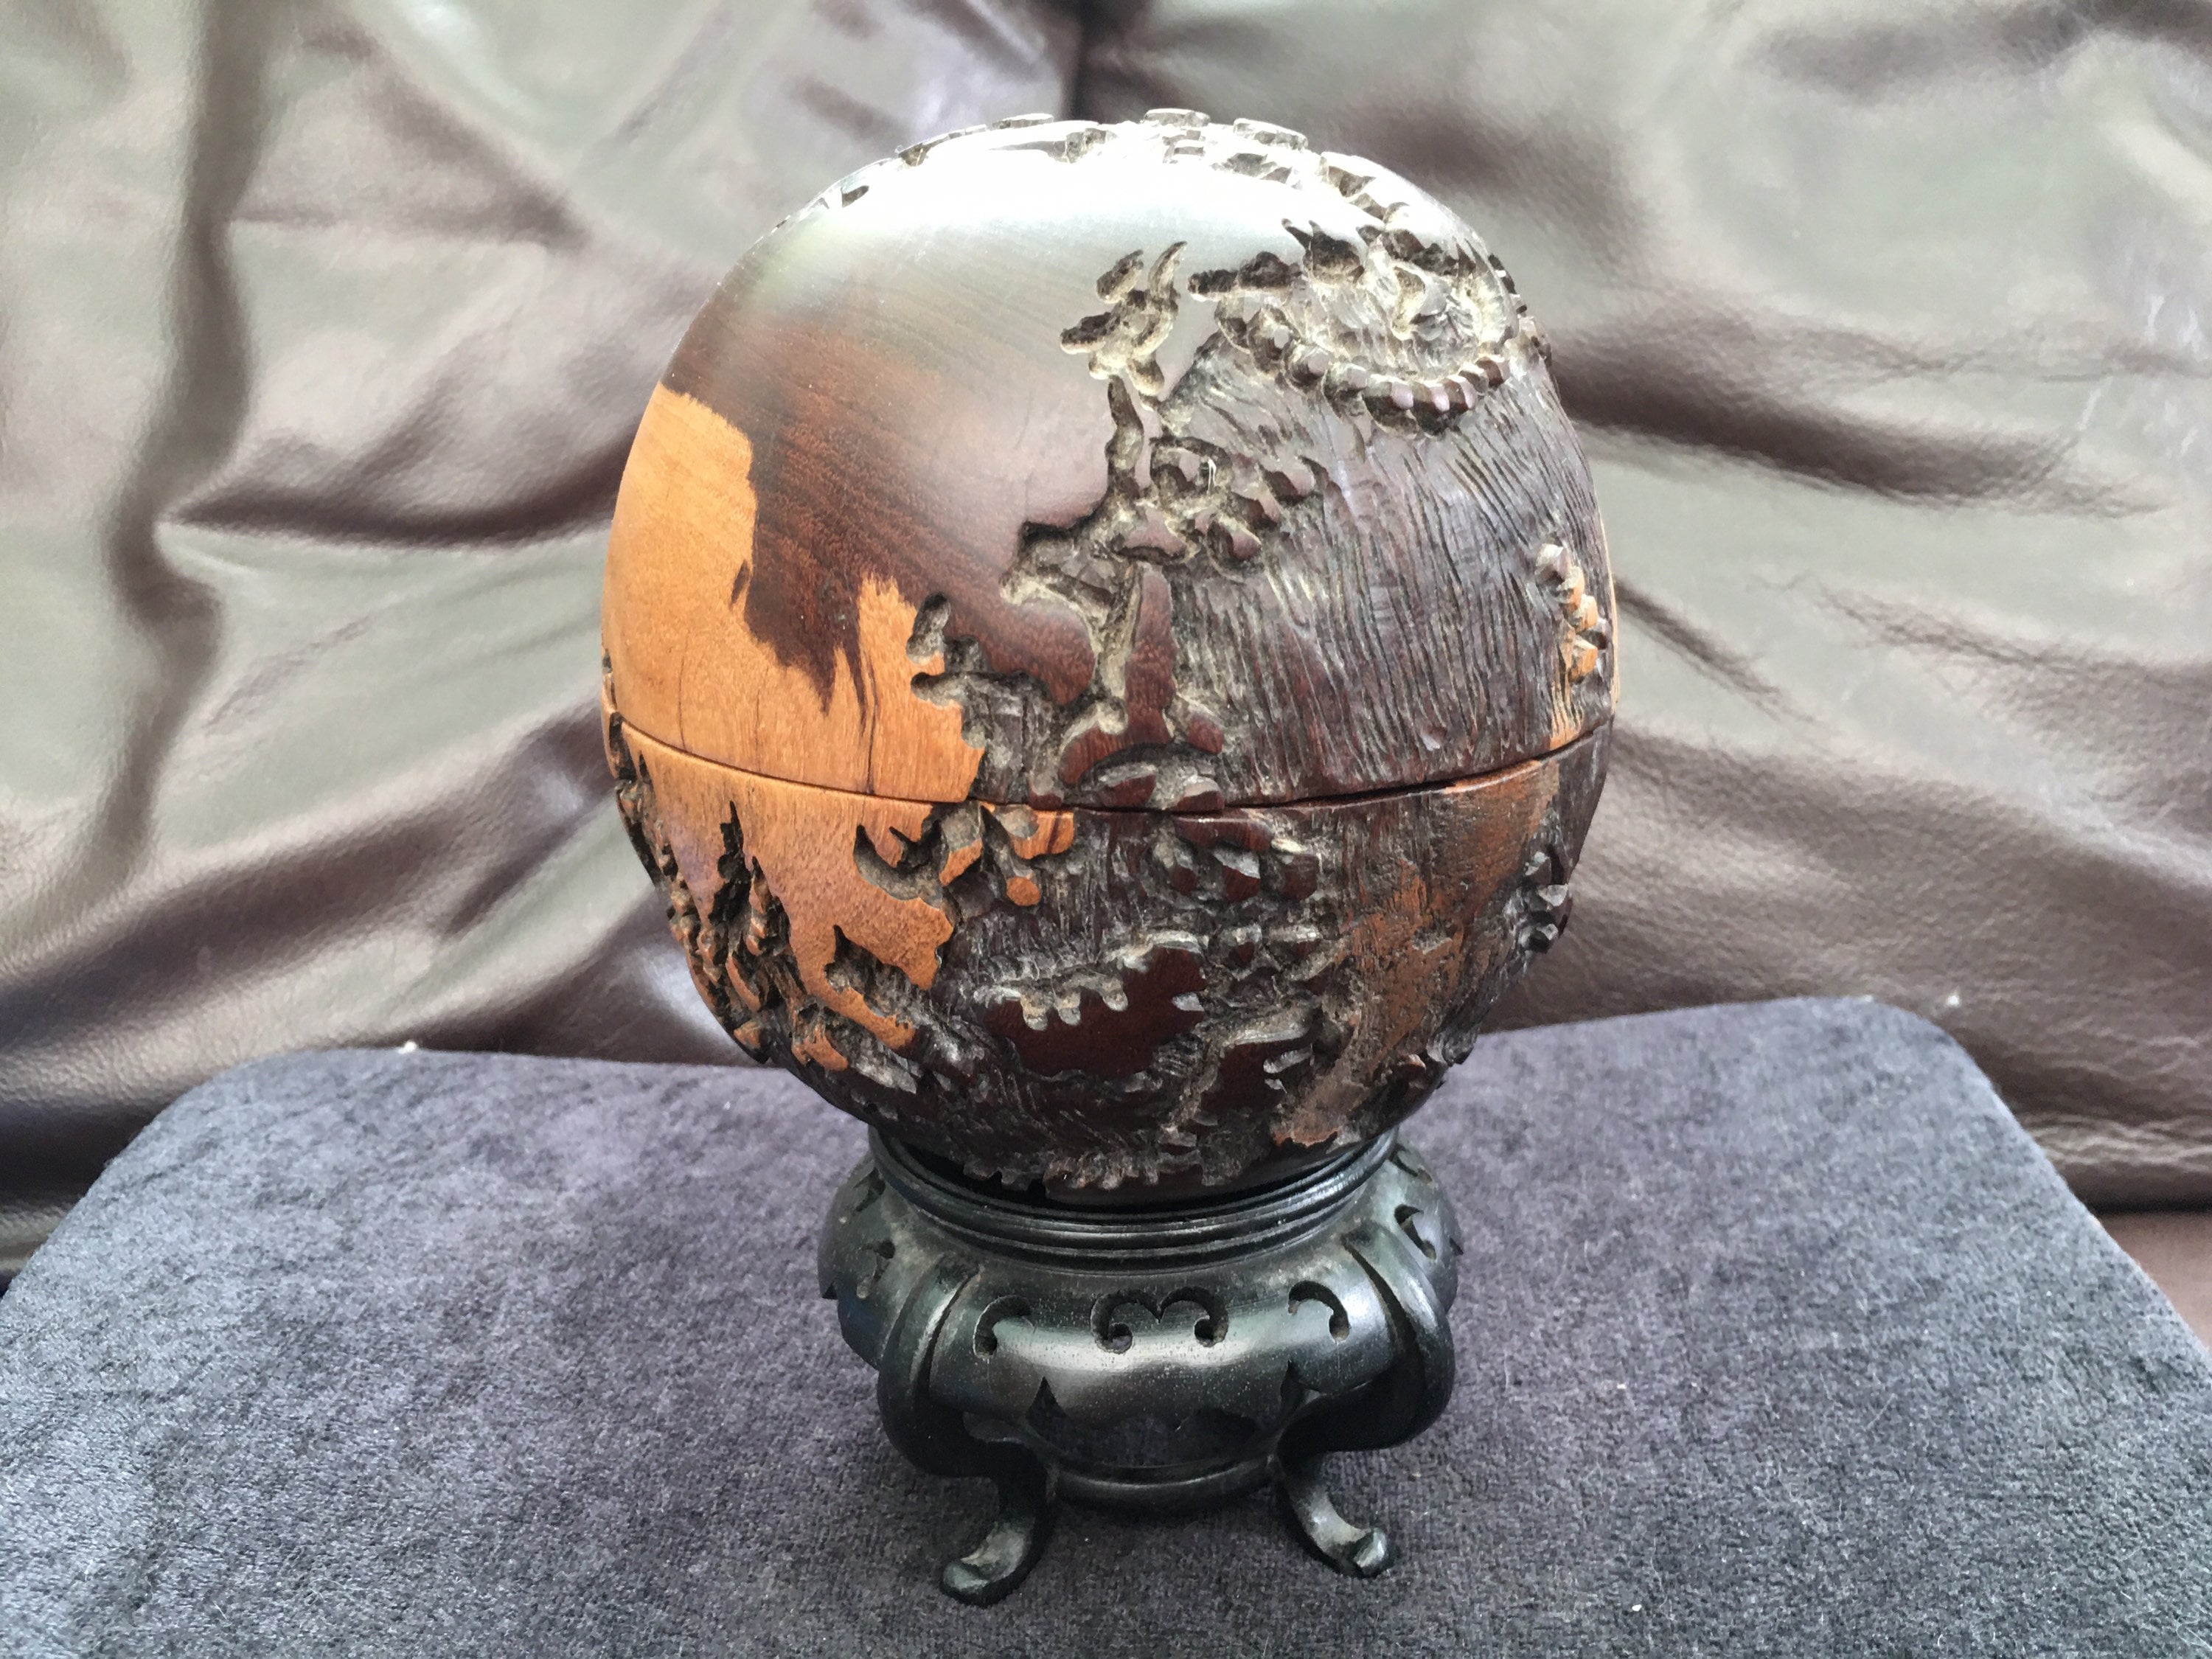 Globe Wall Art, the World is Yours, Wood Sign, Scarface 